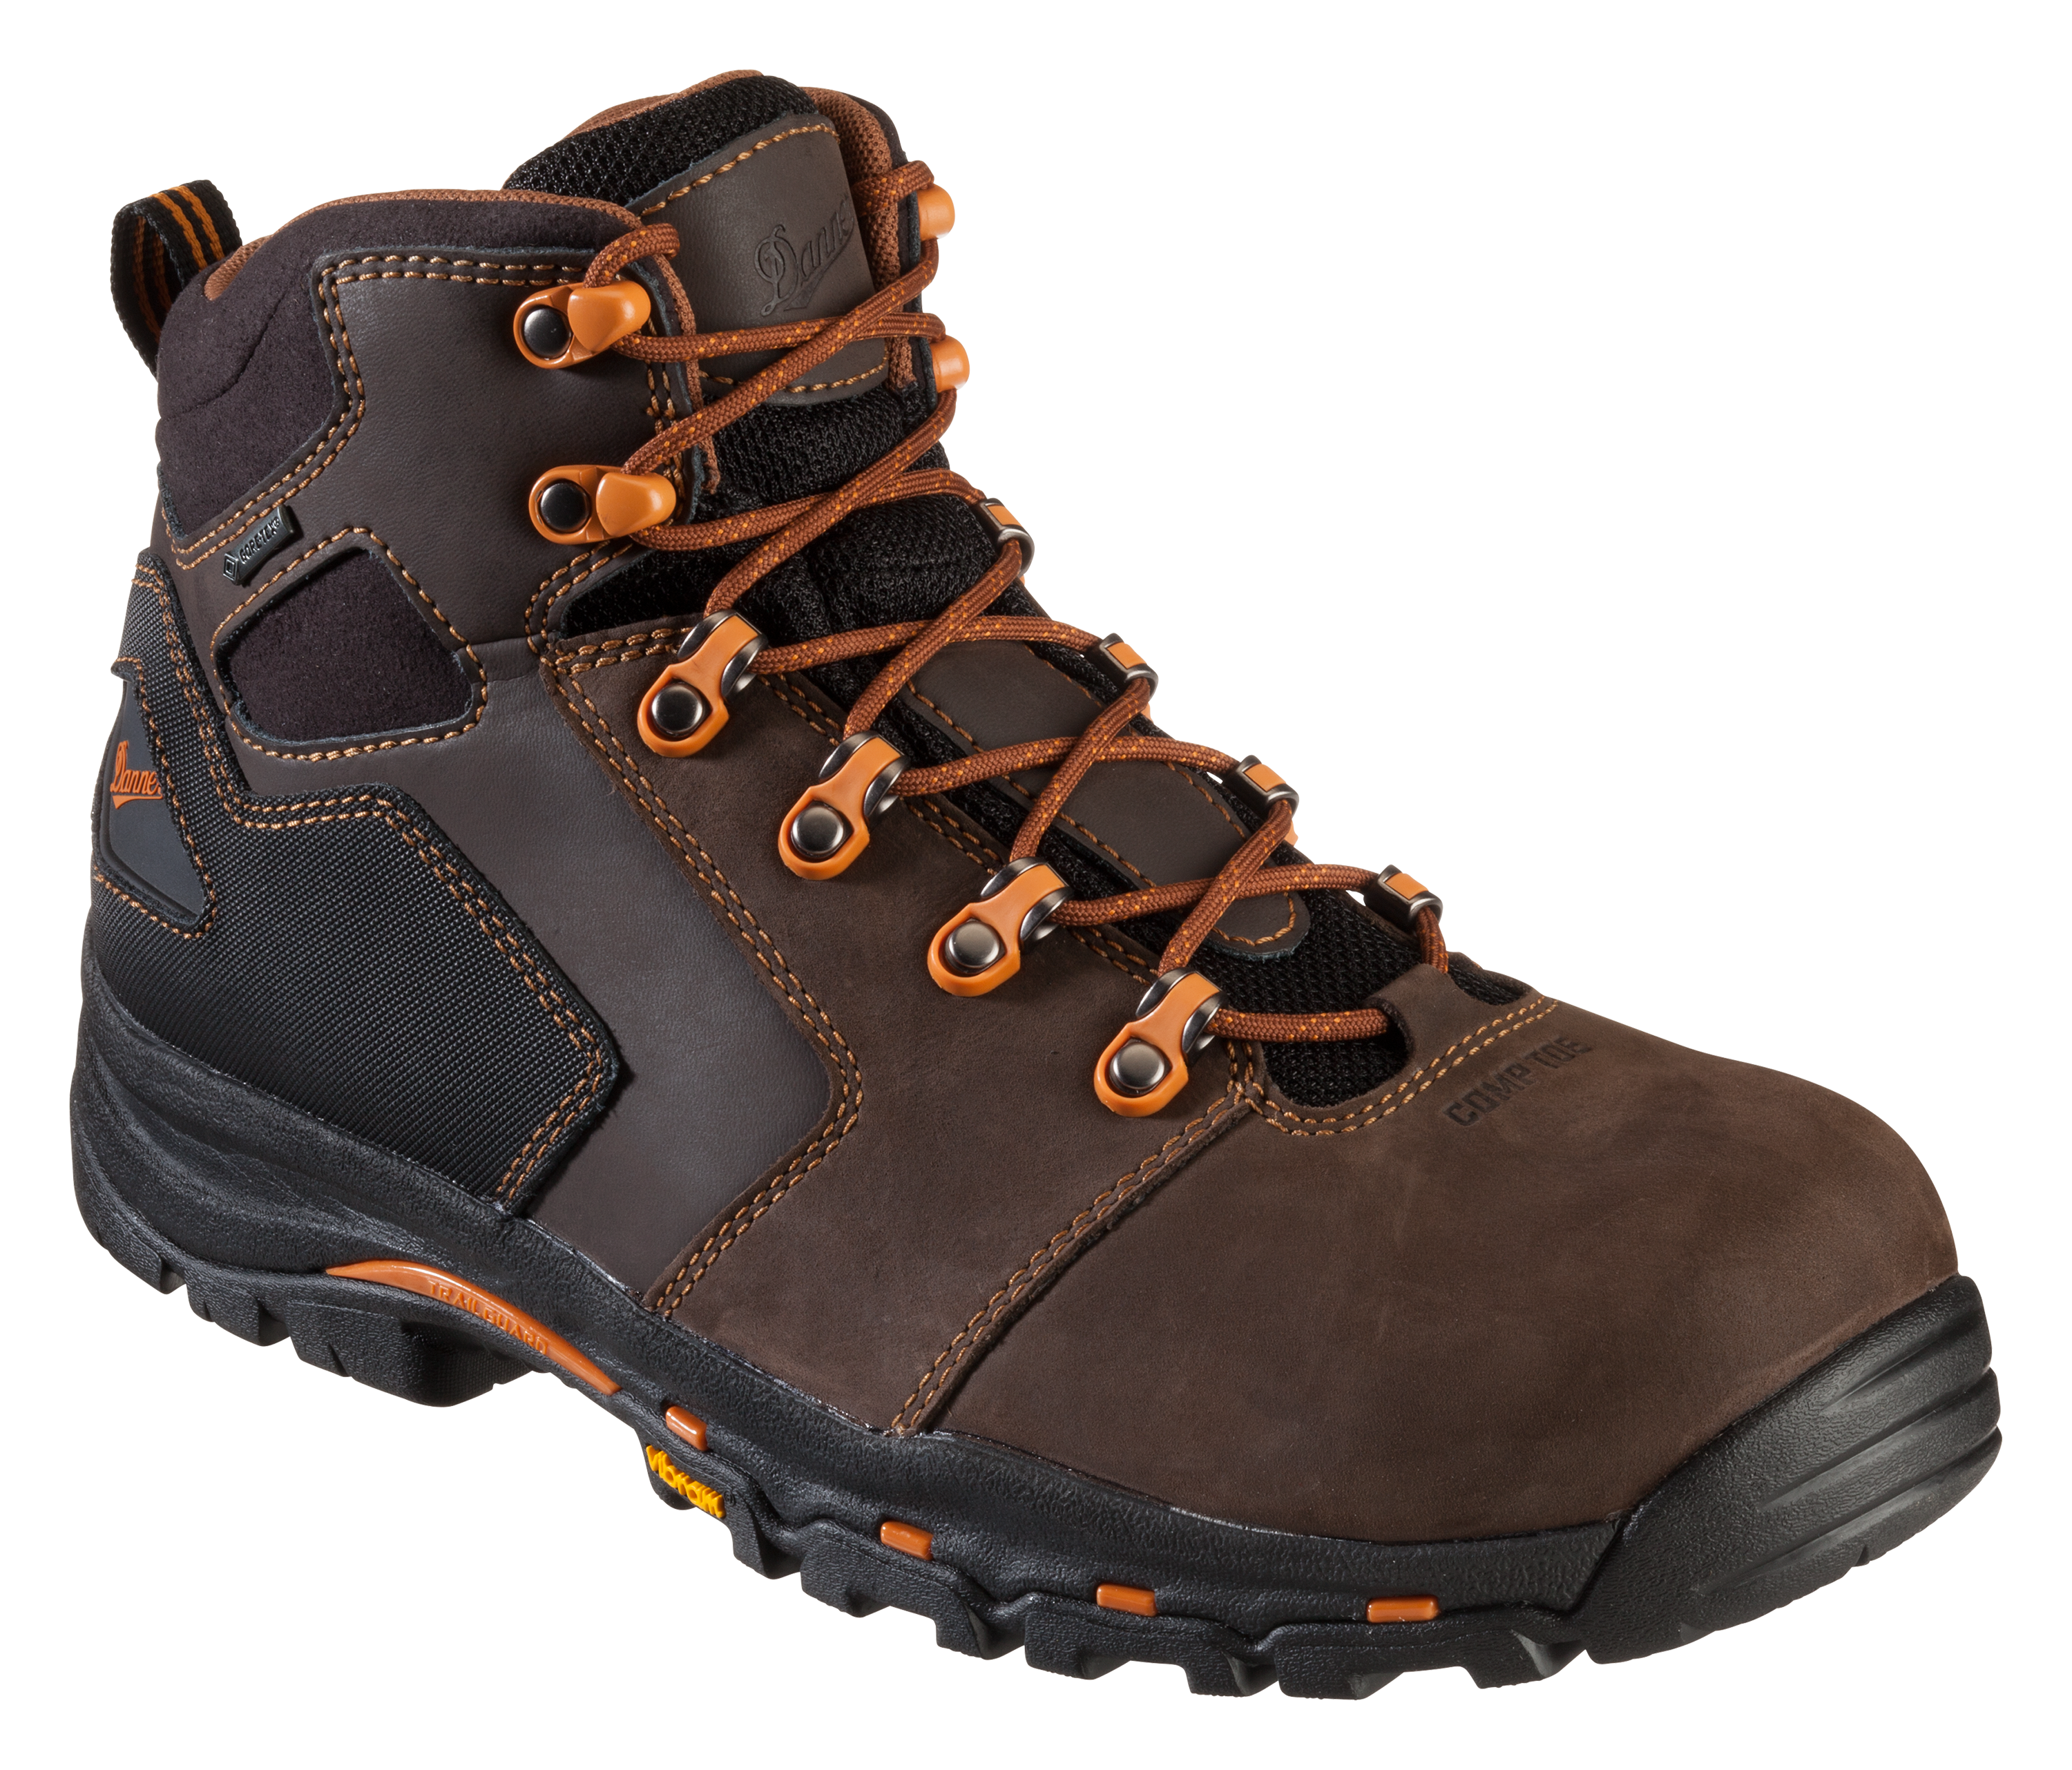 Danner Vicious GORE-TEX Non-Metallic Safety Toe Work Boots for Men - Brown - 10M